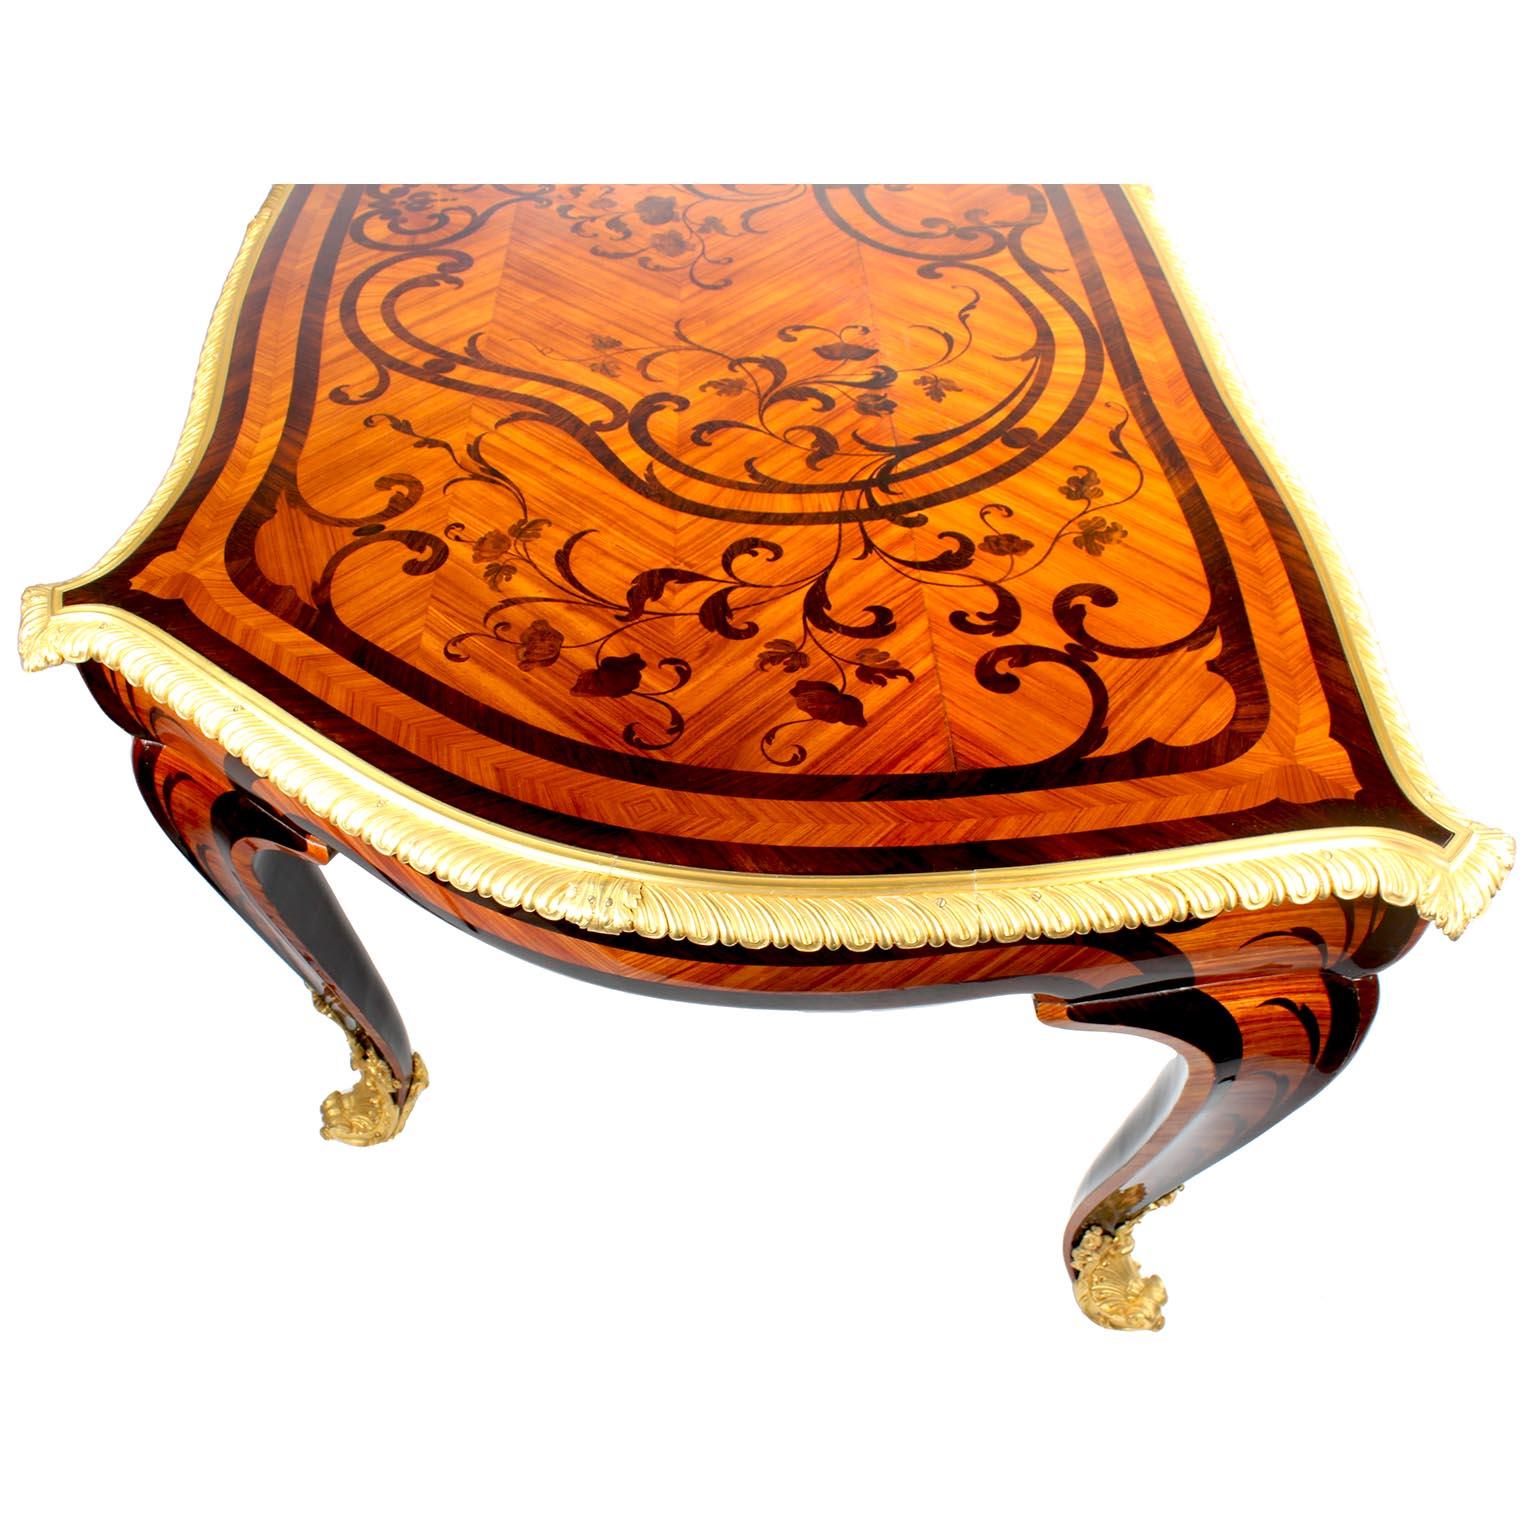 French 19th Century Louis XV Style Kingwood Marquetry Ormolu-Mounted Desk Table In Good Condition For Sale In Los Angeles, CA